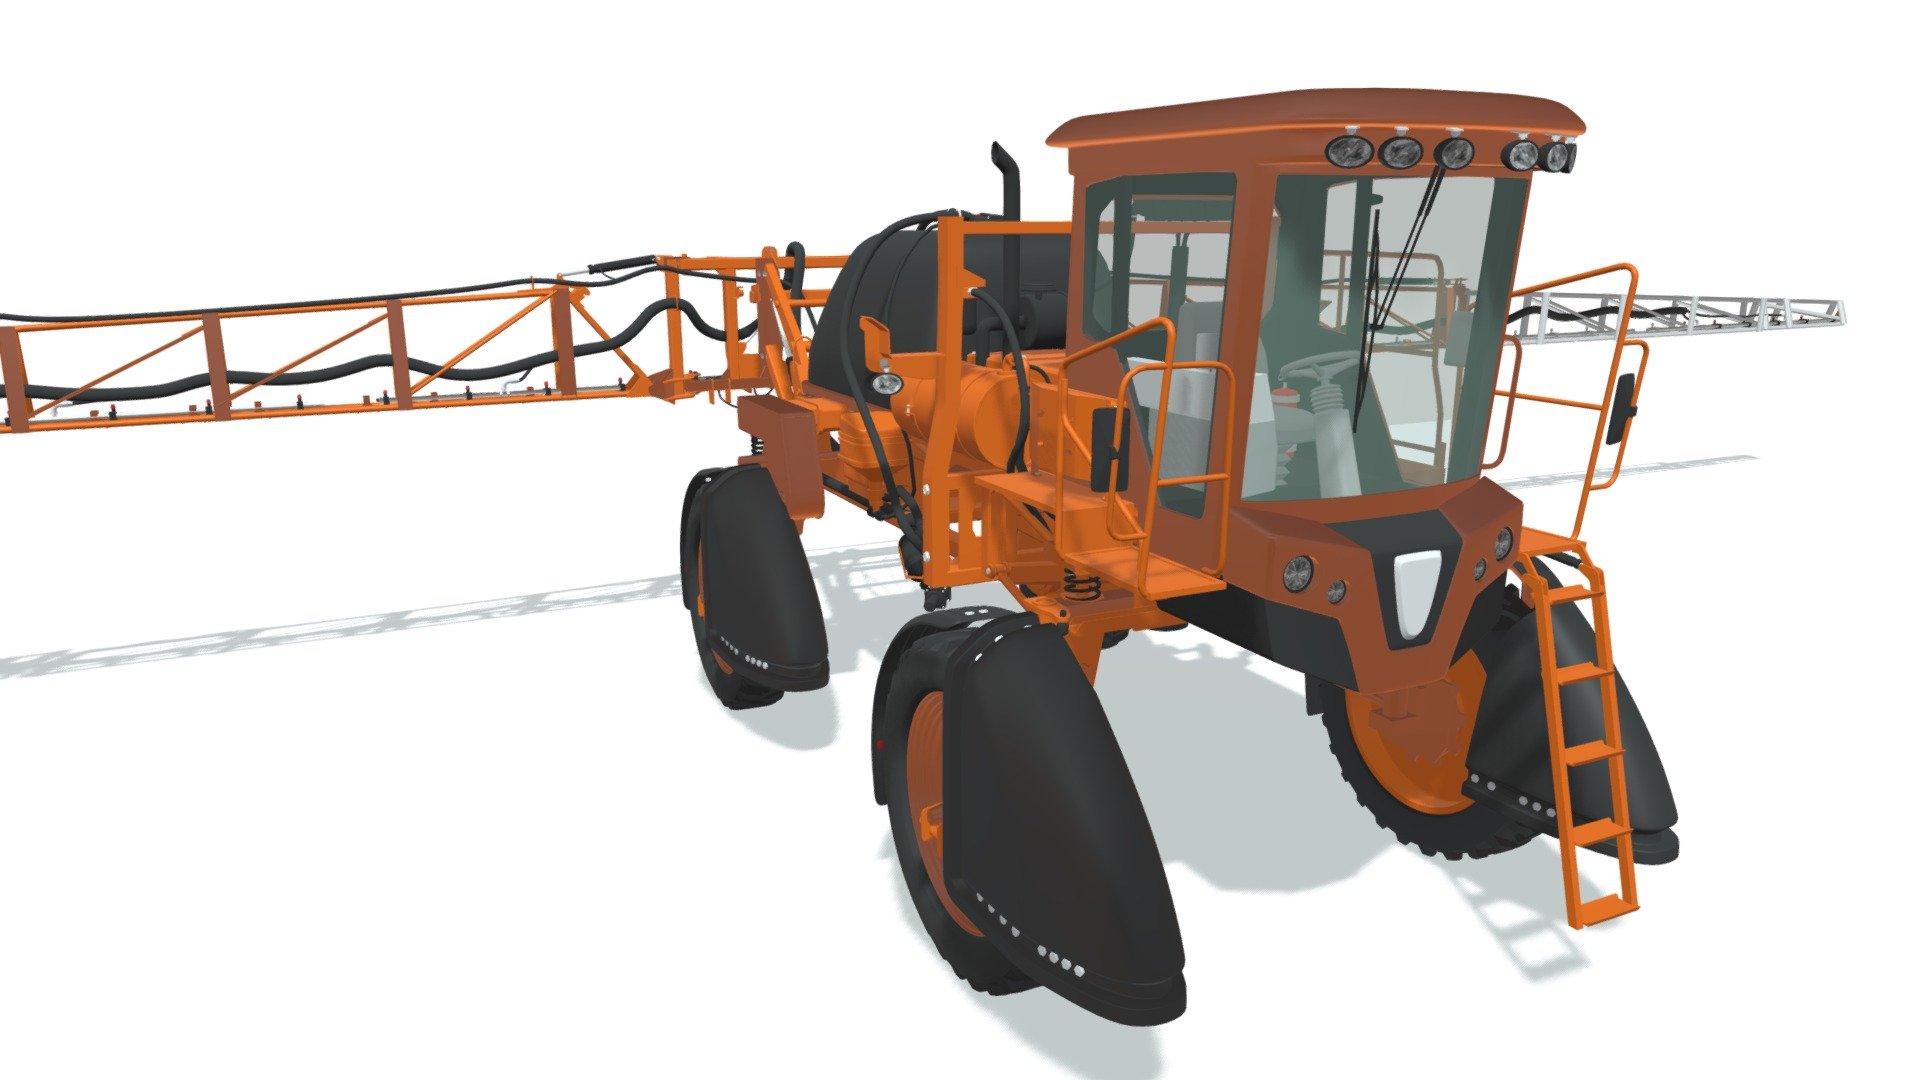 High quality 3d model of self-propelled farm sprayer.
Semi interior details.
Colors could be simply modified 3d model